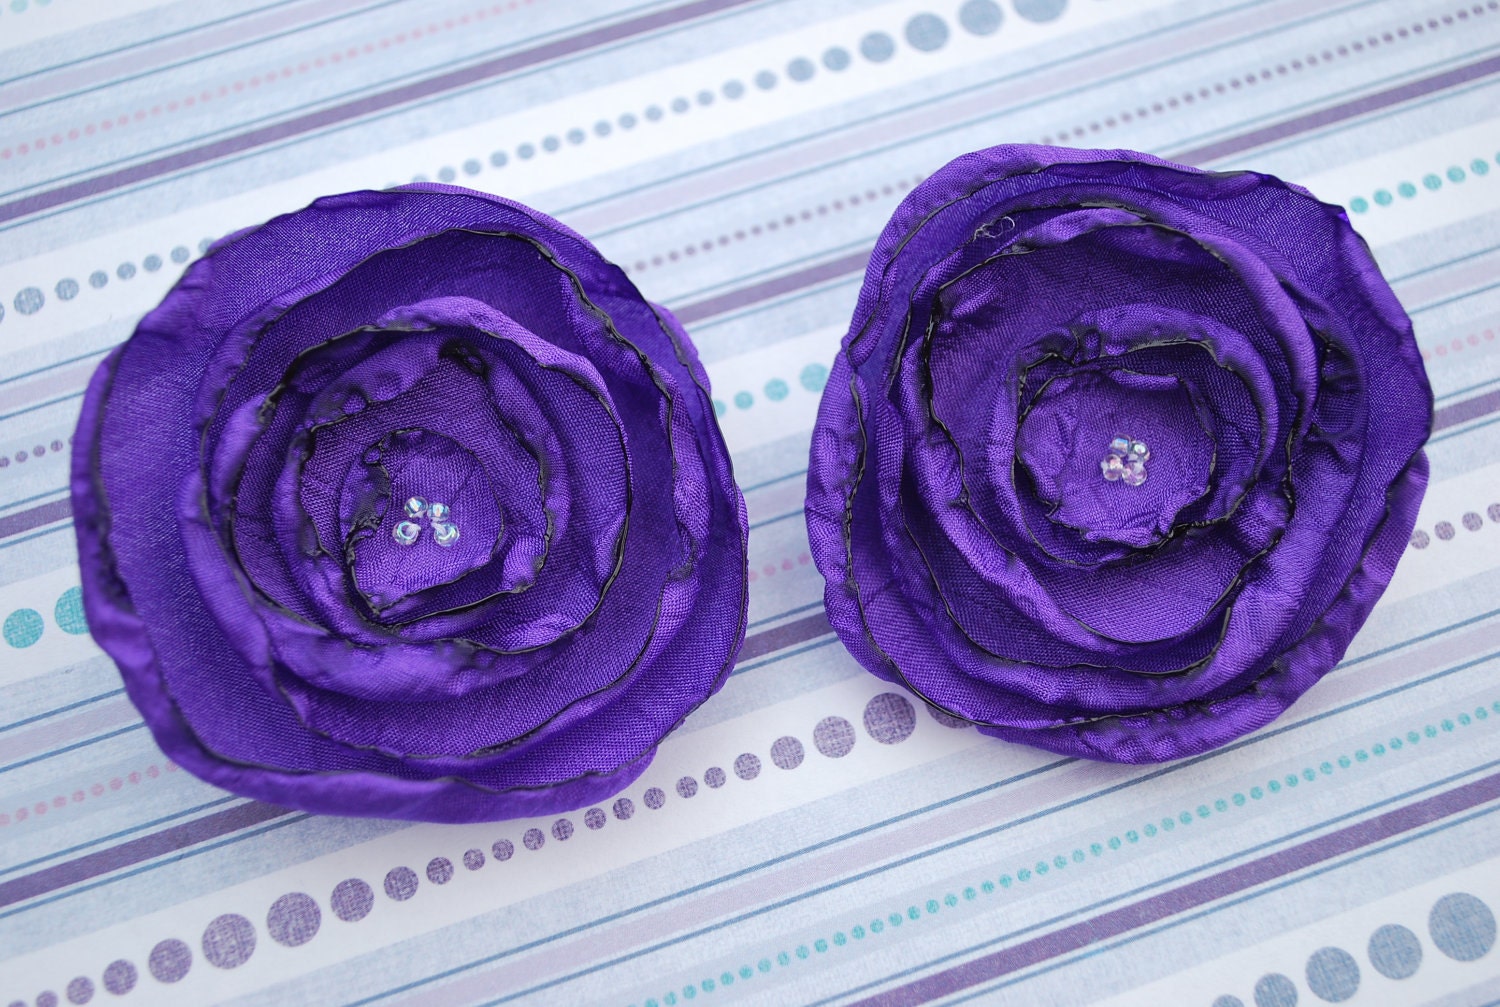 2 Purple Fabric Flower Accessory Clips for Shoes, Purses, Clothes and More